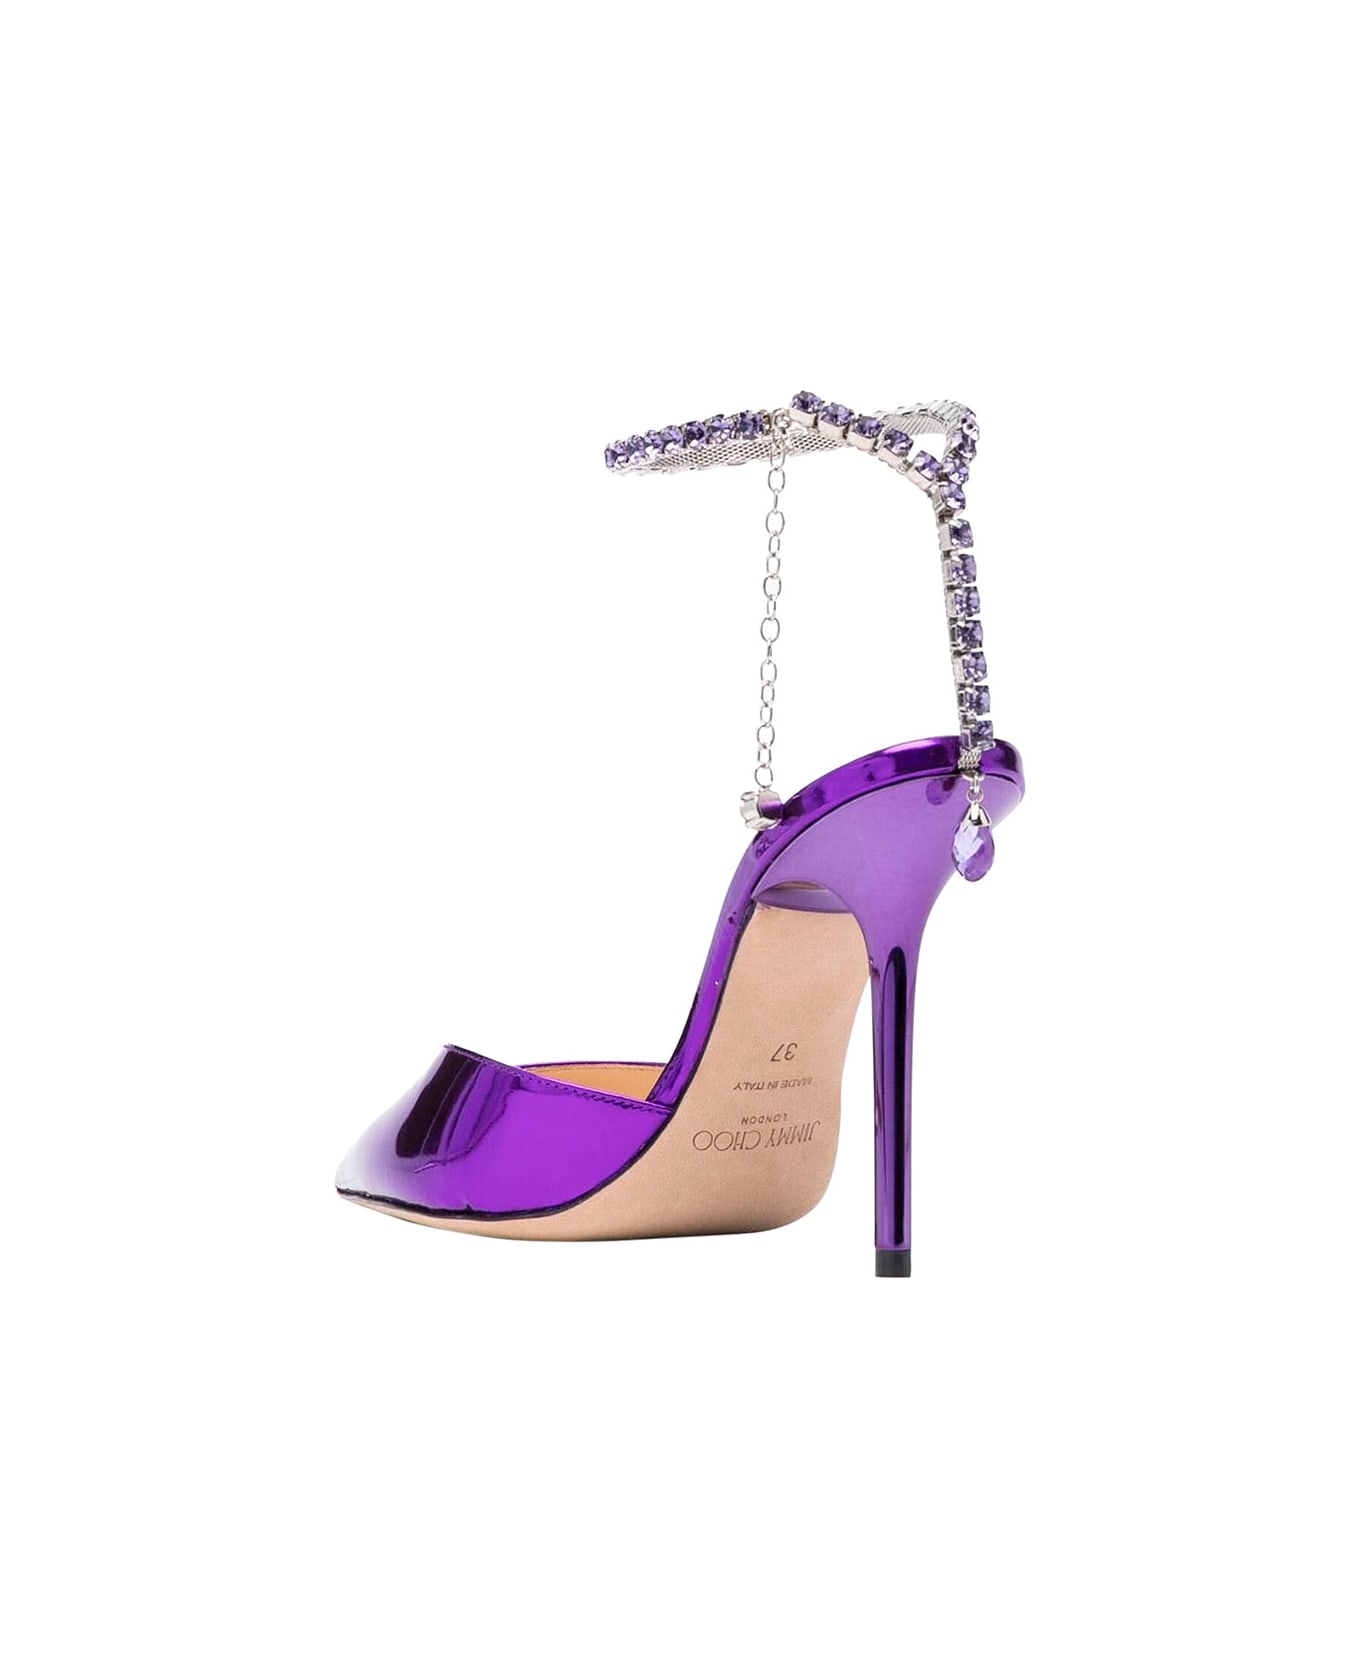 Jimmy Choo 'saeda' Purple Pointed And Closed Toe Sandals With Rhinestone Chain In Metallic Leather Woman - Violet ハイヒール